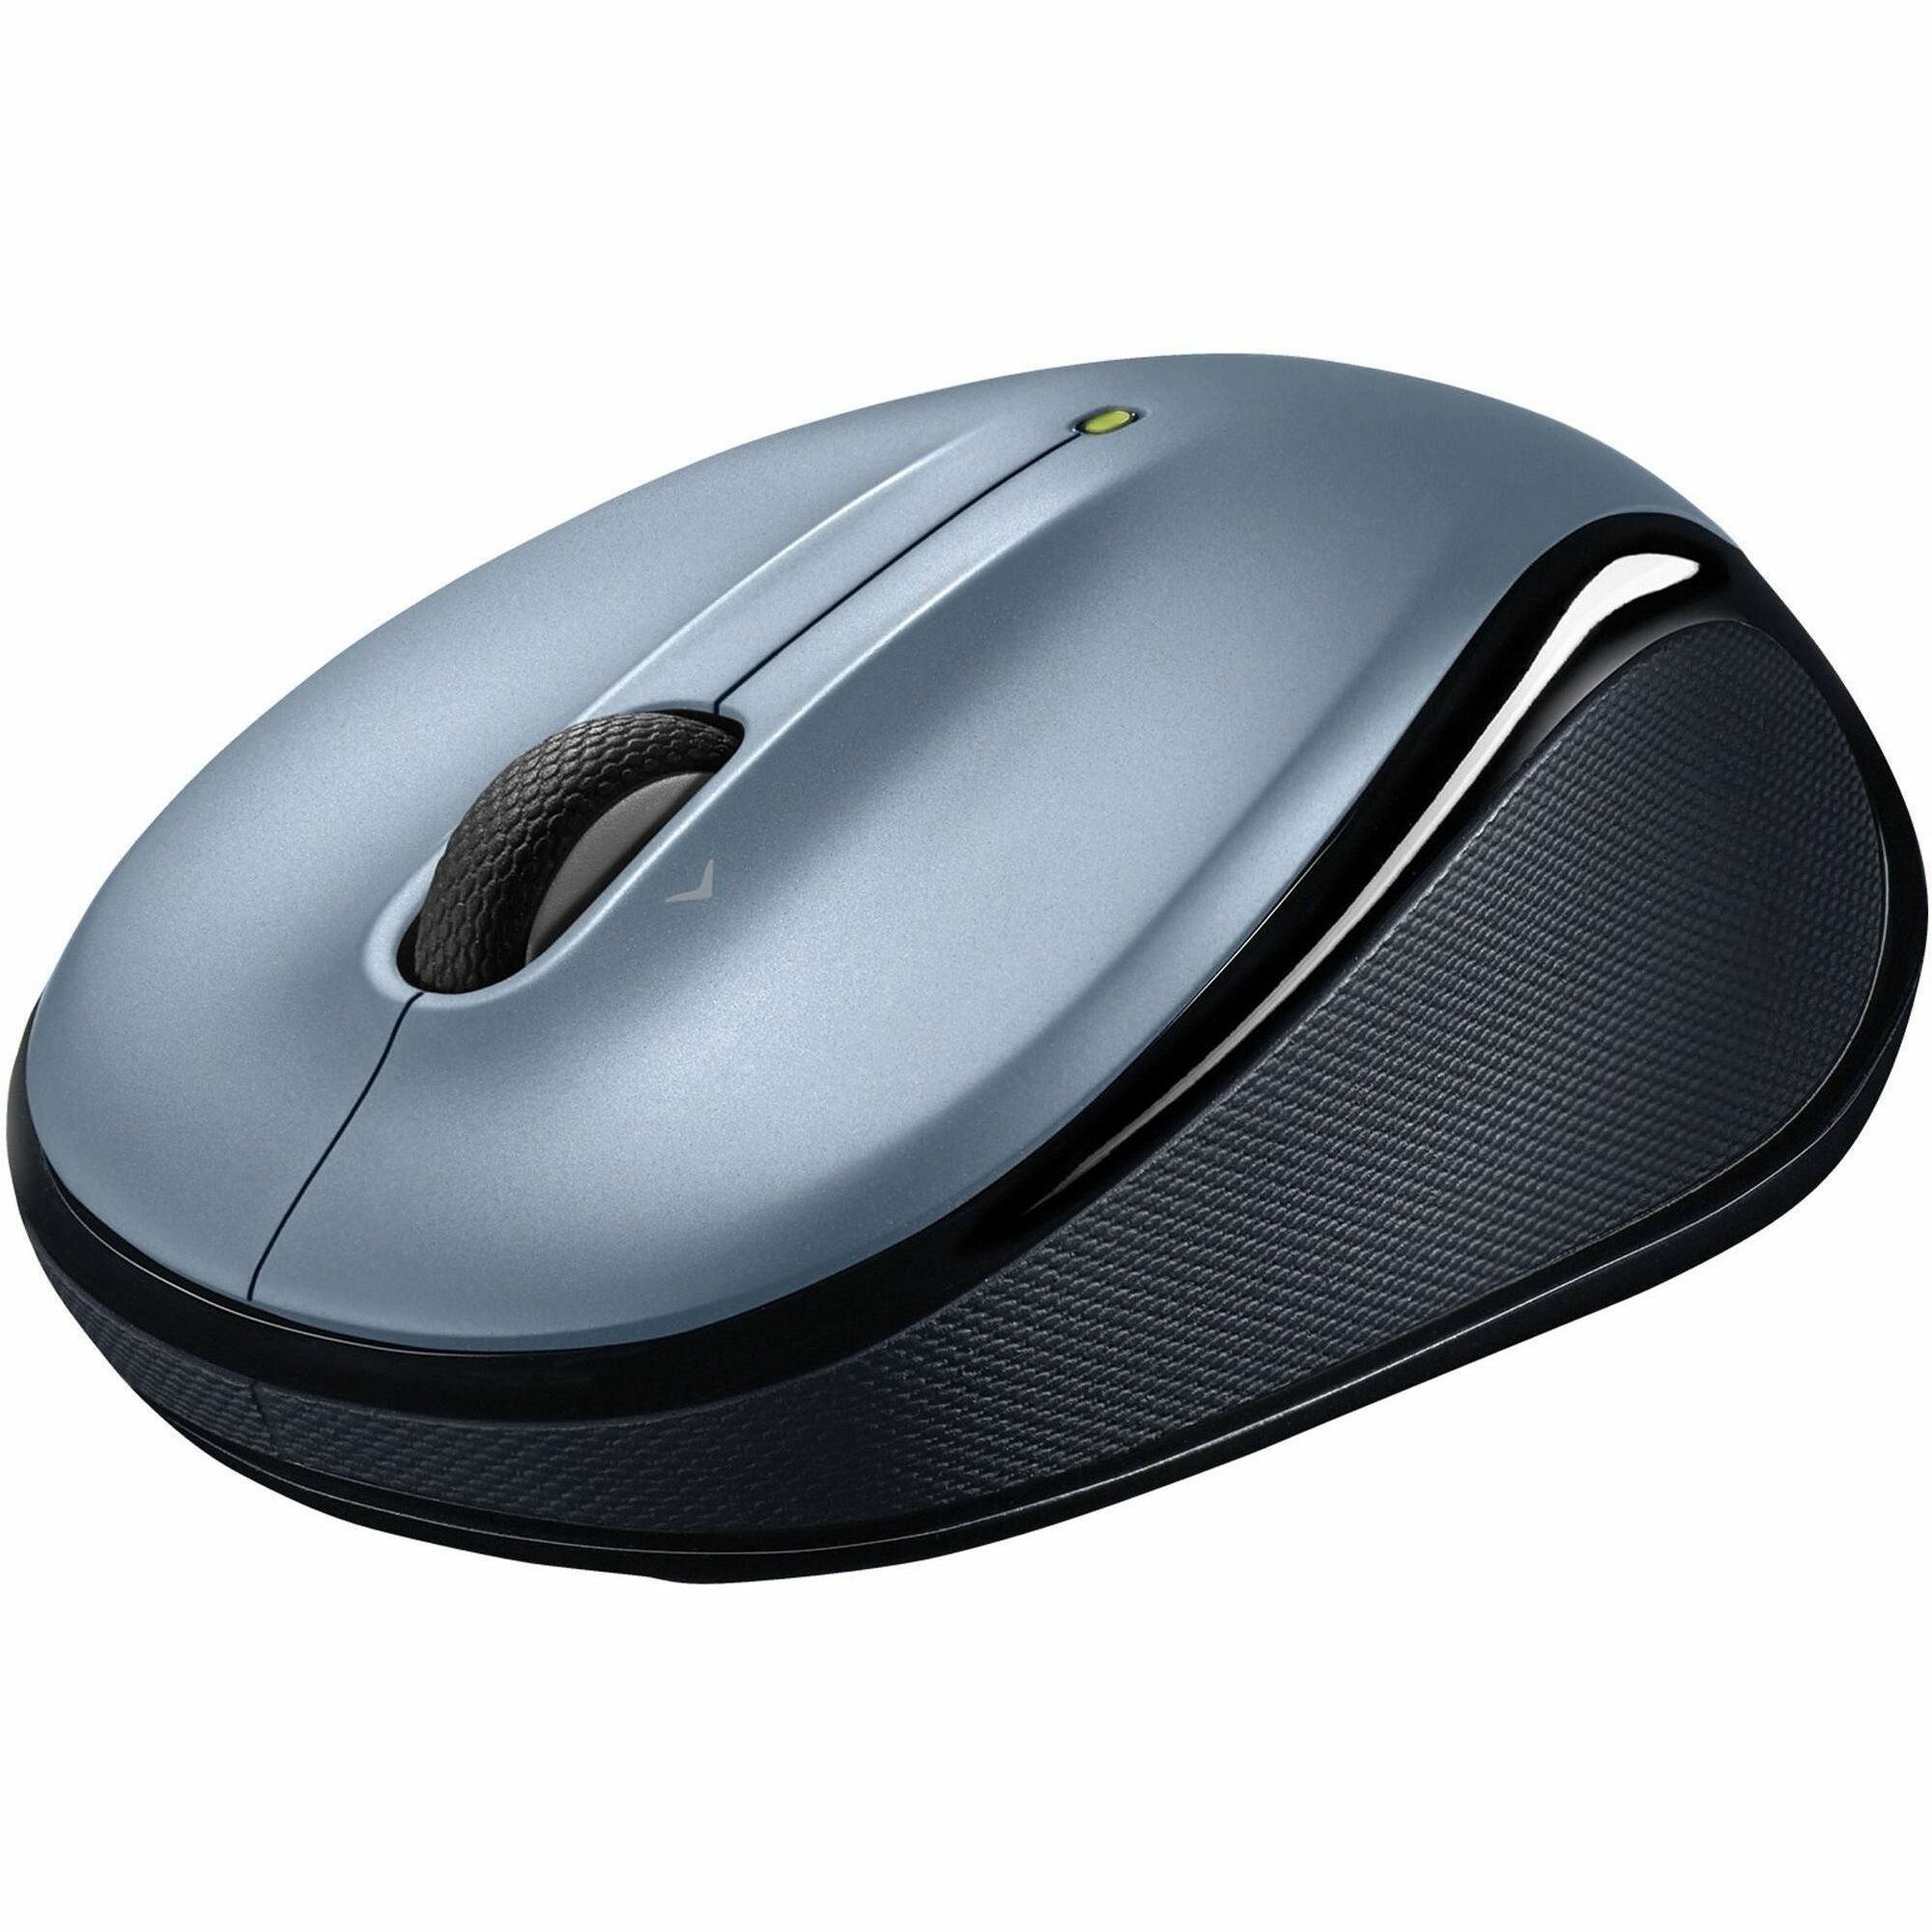 Logitech M325S Wireless Mouse - Optical - Wireless - Radio Frequency - 2.40 GHz - Silver - USB - 1000 dpi - Tilt Wheel - 5 Button(s) - 3 Programmable Button(s) - Small Hand/Palm Size - Symmetrical - 1